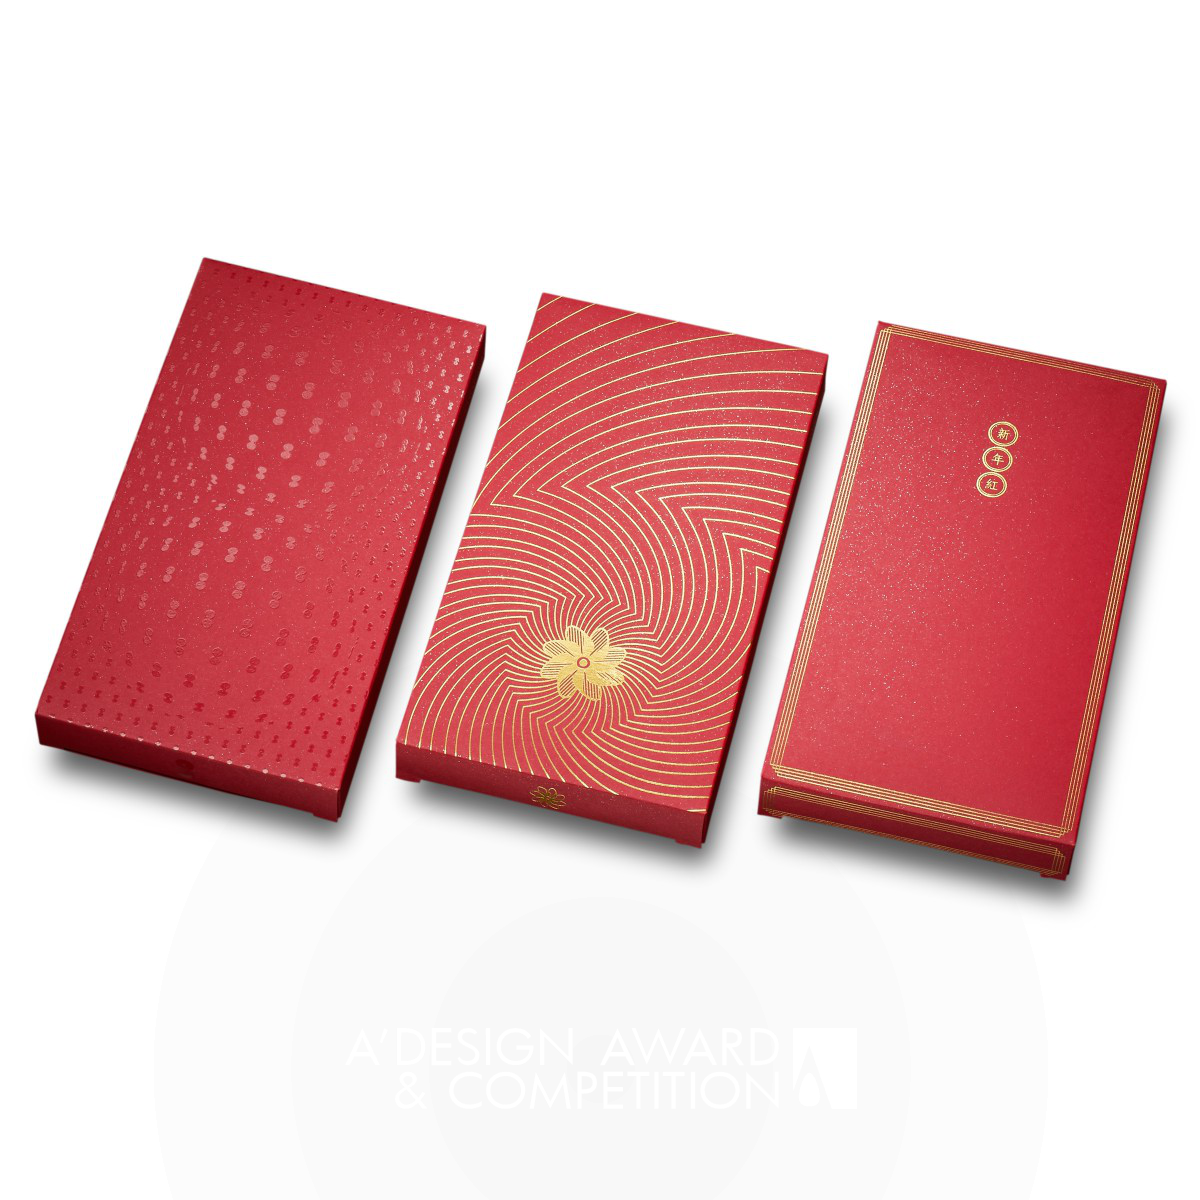 Gift For Good - Red Packet Series Seasonal Gift for retail market by The Box Brand Design Ltd.